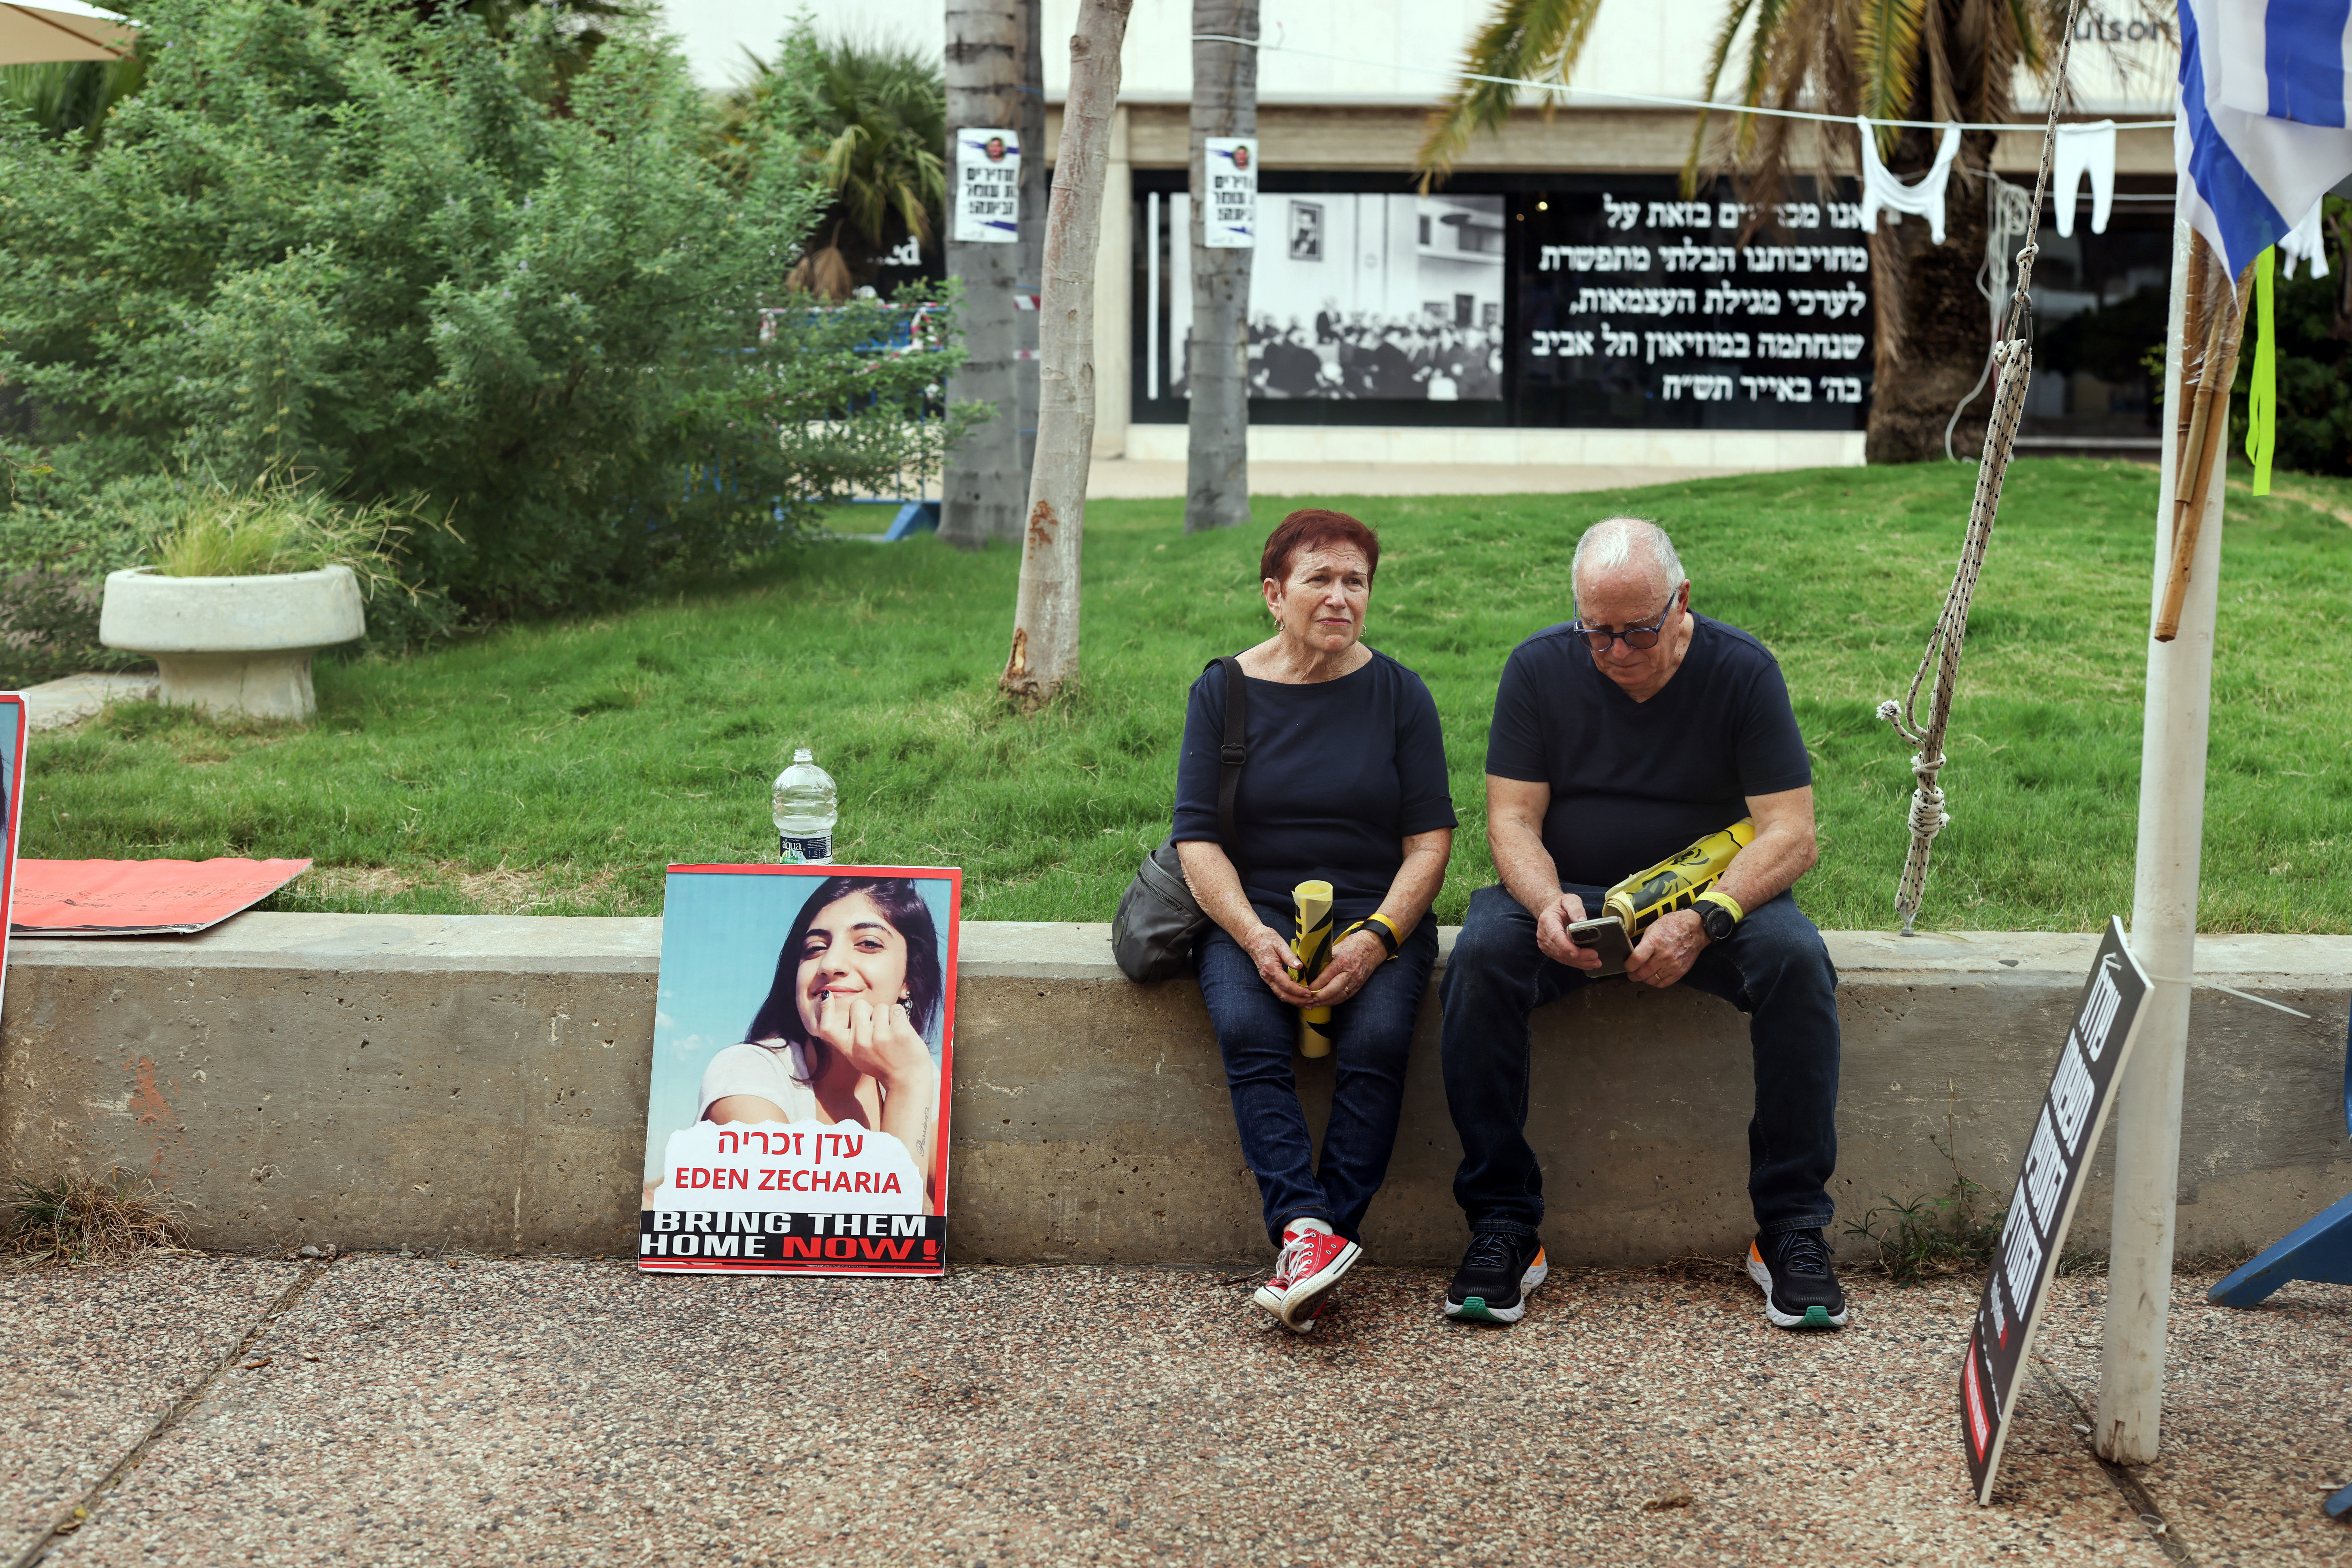 People sit on a wall next to a picture of hostage Eden Zecharia, 28, who was seized by Hamas gunmen following a deadly infiltration to Israel from the Gaza Strip, in Tel Aviv